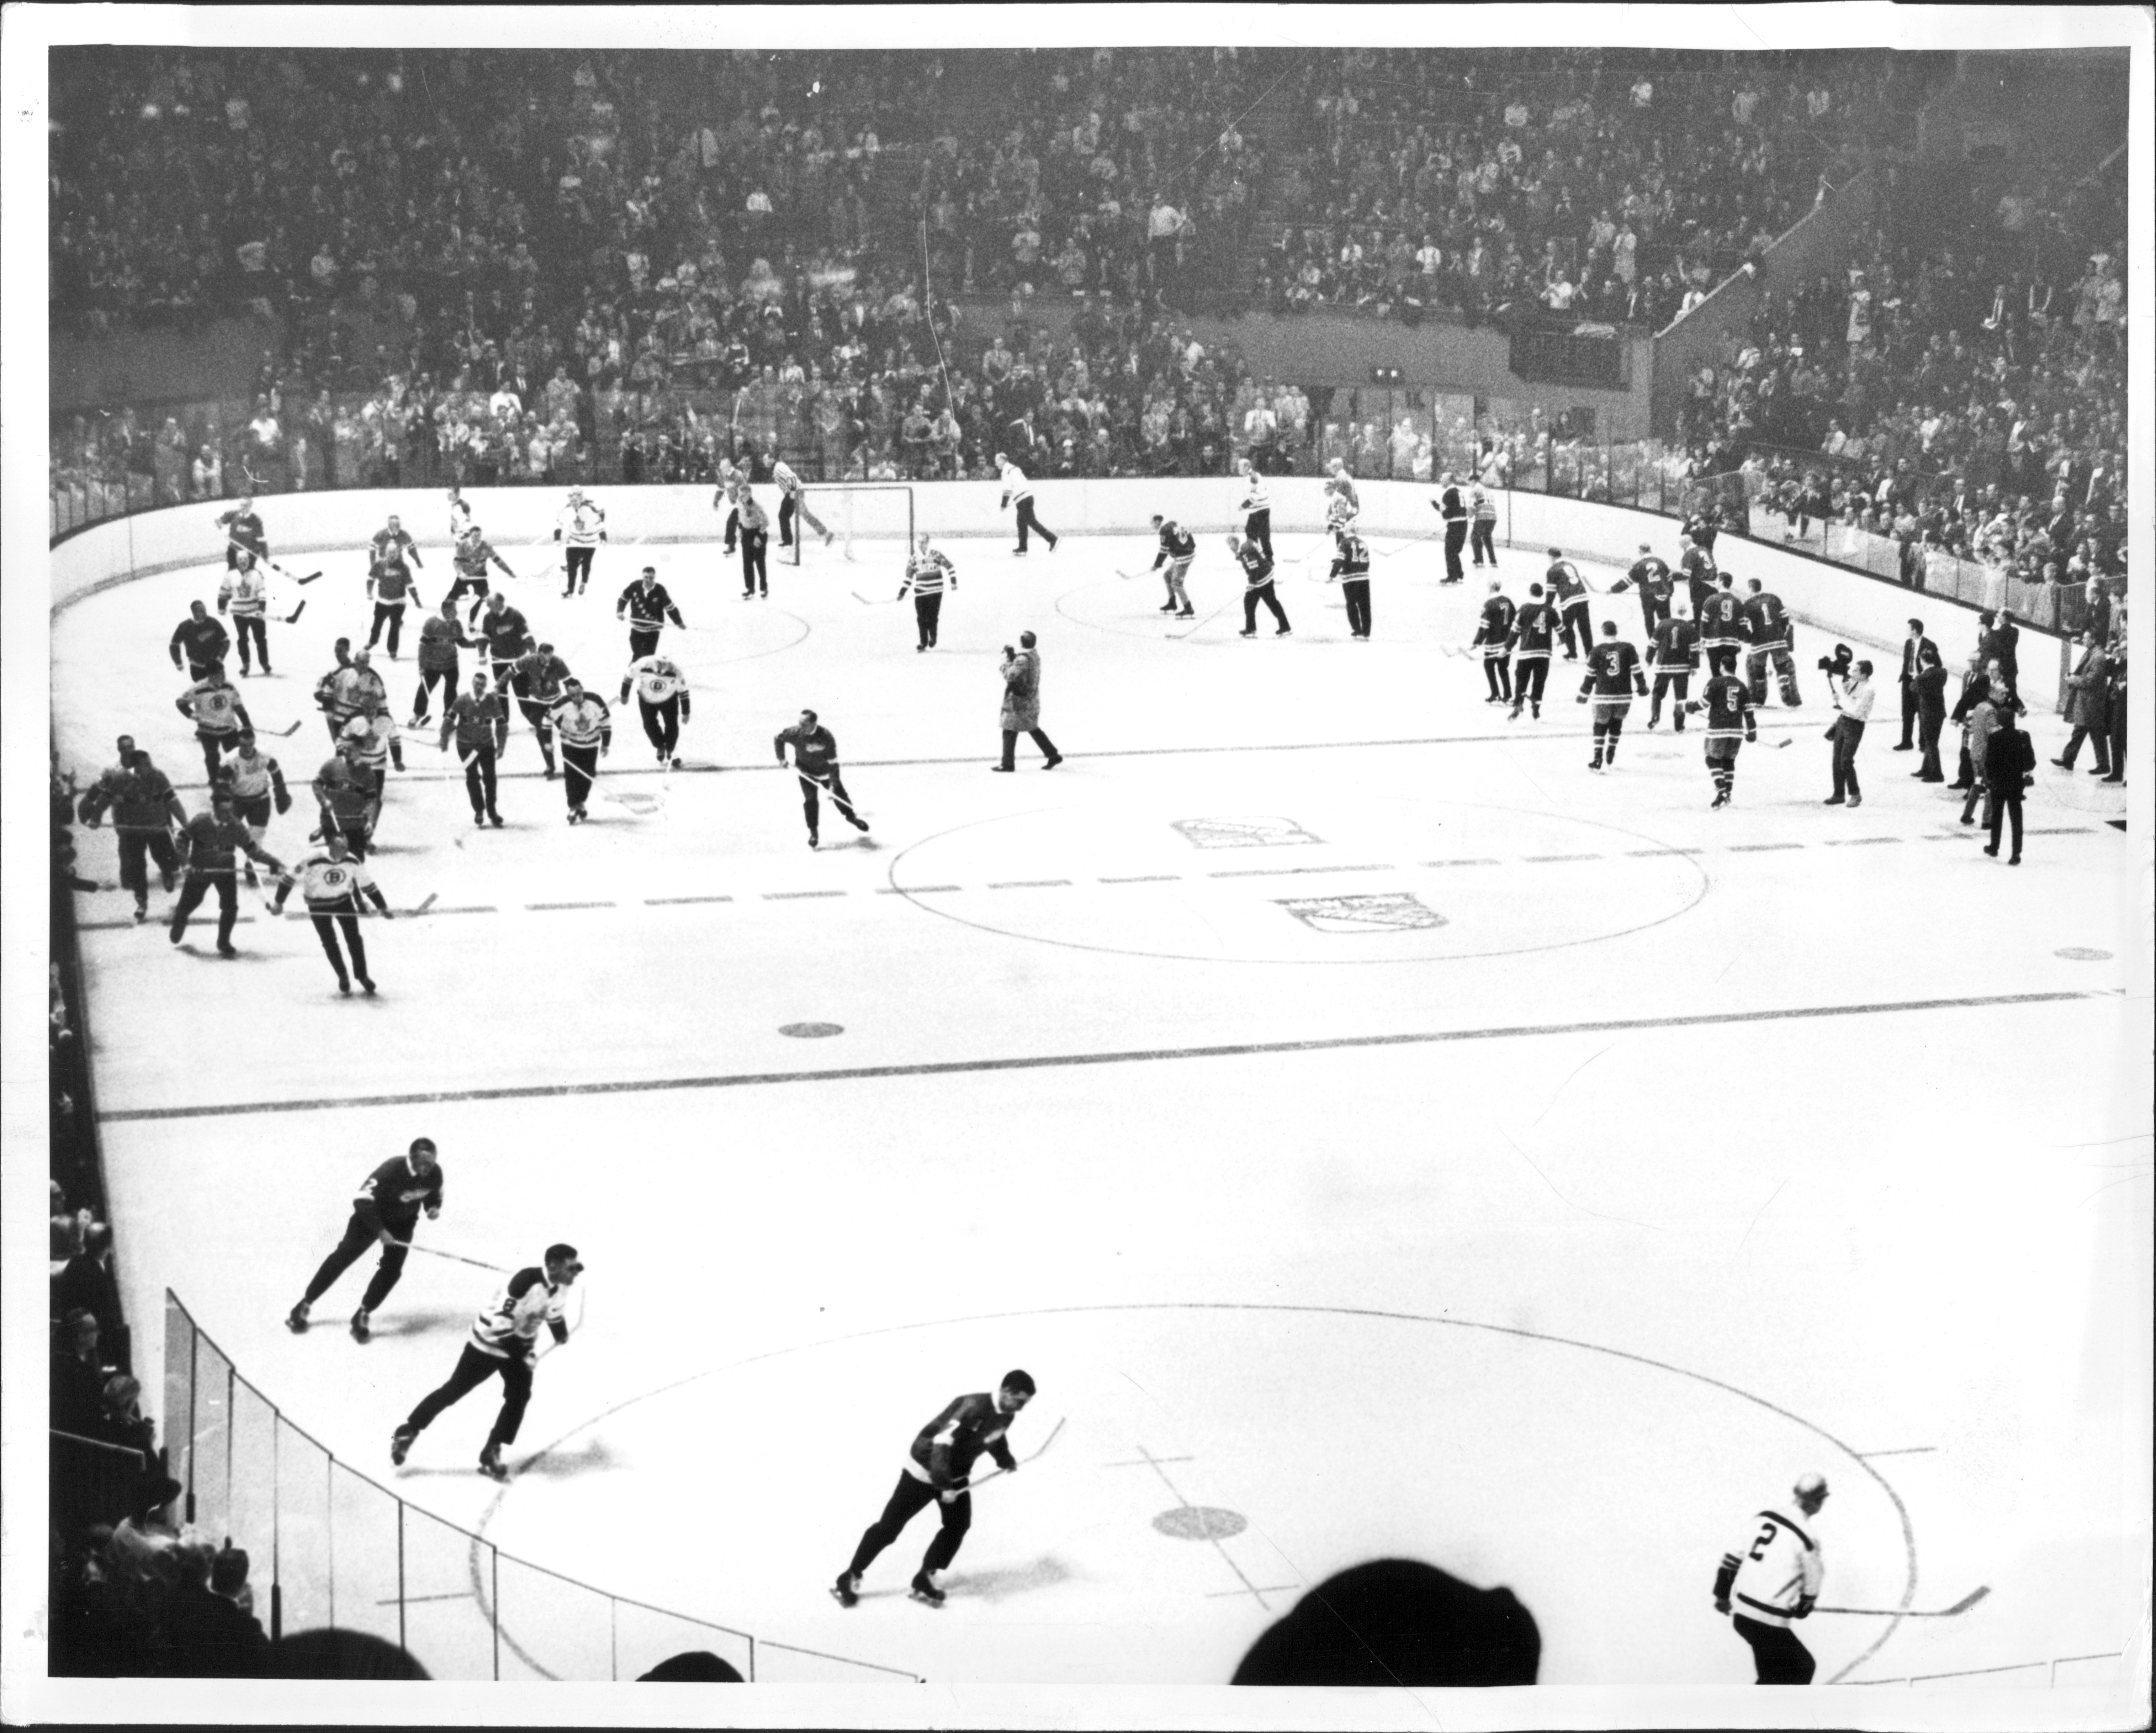 Nostalgia ruled the Old Garden yesterday as the greats of hockey past came to say goodbye. If you look closely, you might see thing Johnson, the Cook brothers, Maurice Richard. February 12, 1968. (Photo by William N. Jacobellis/New York Post Archives / (c) NYP Holdings, Inc. via Getty Images)